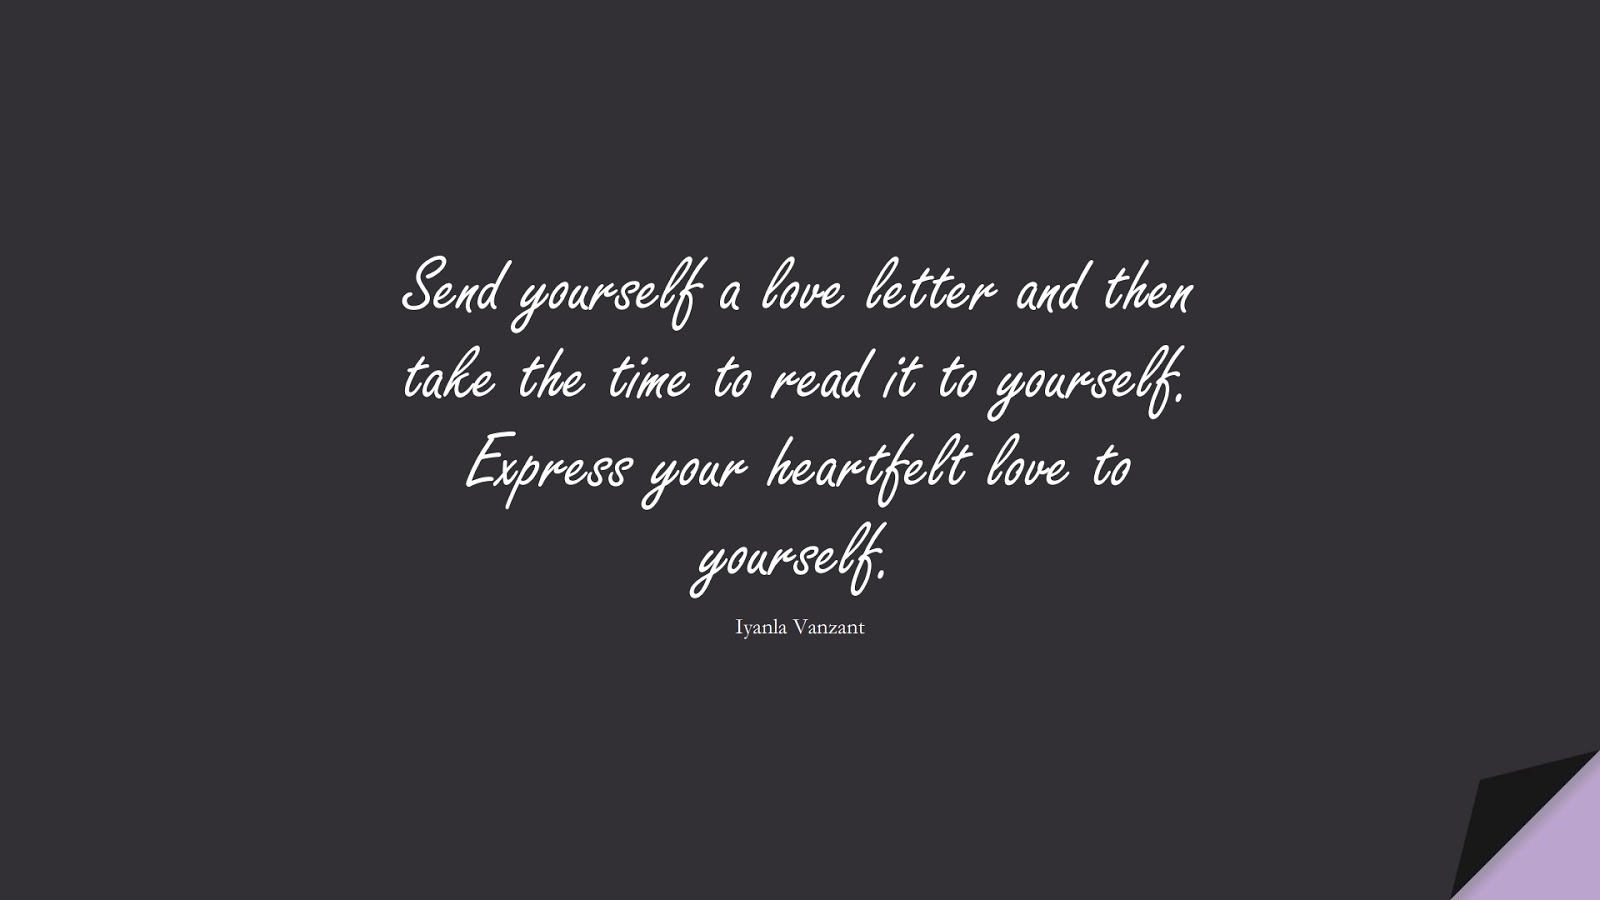 Send yourself a love letter and then take the time to read it to yourself. Express your heartfelt love to yourself. (Iyanla Vanzant);  #LoveYourselfQuotes